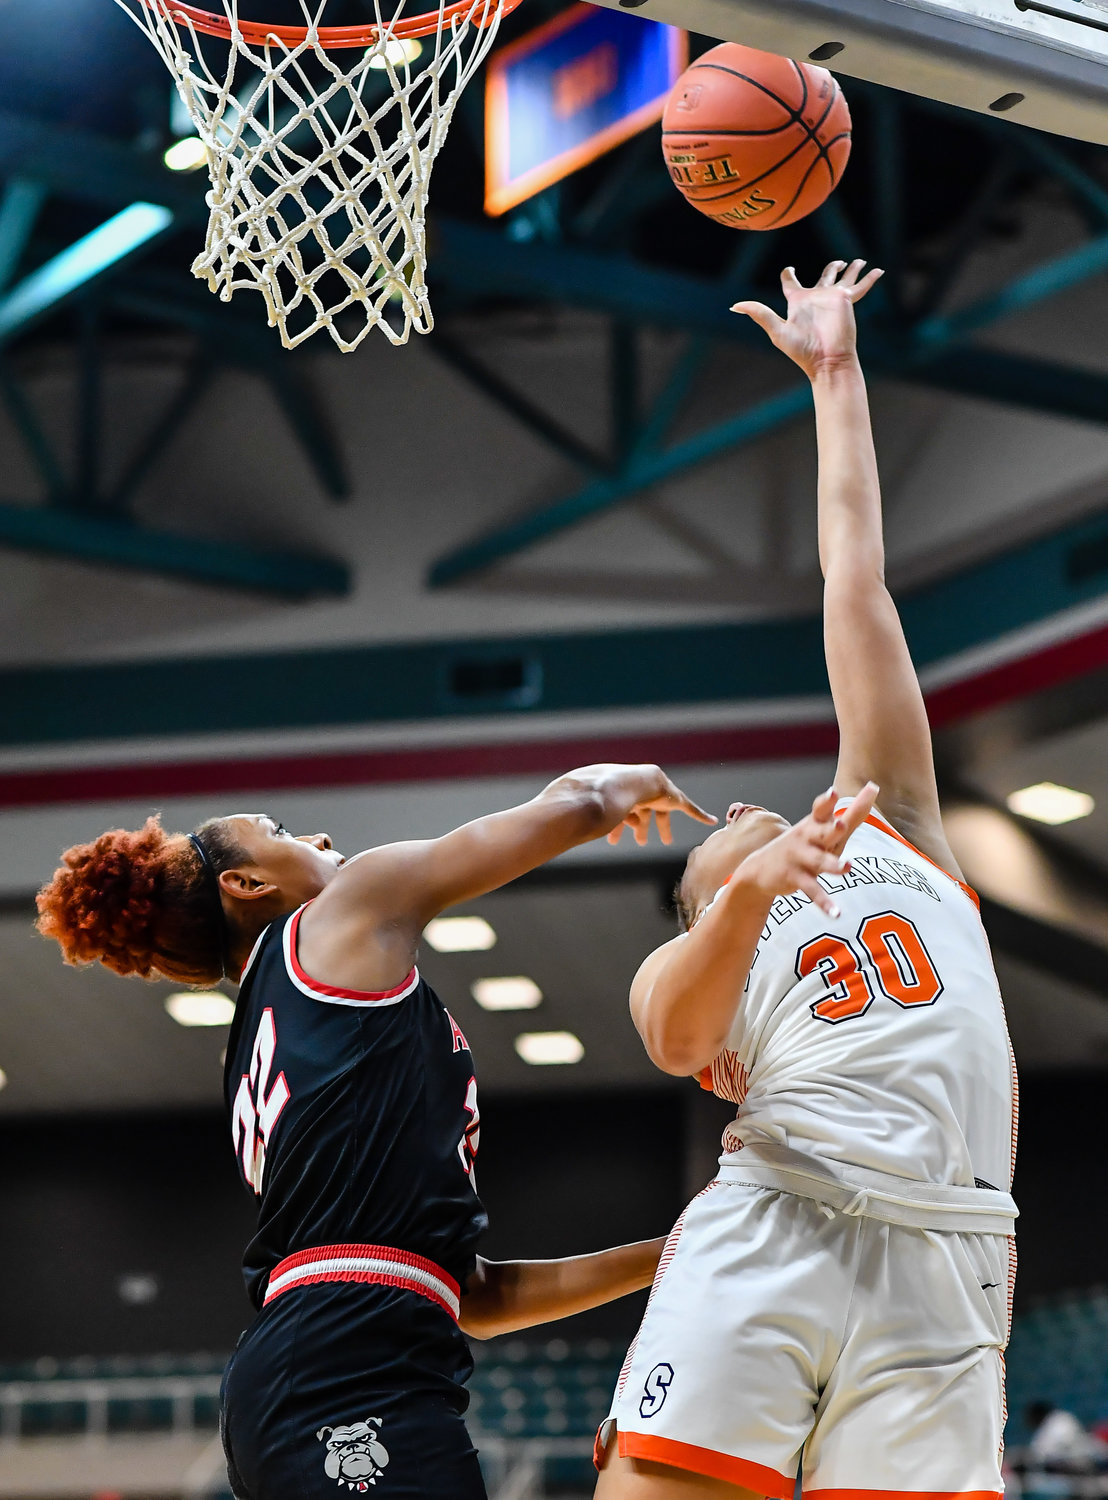 Katy Tx. Feb 22, 2022:   Seven Lakes Justice Carlton #30 get the shot off scoring for the Spartans during the Regional Quarterfinal playoff game, Seven Lakes vs Fort Bend Austin at the Merrell Center. (Photo by Mark Goodman / Katy Times)